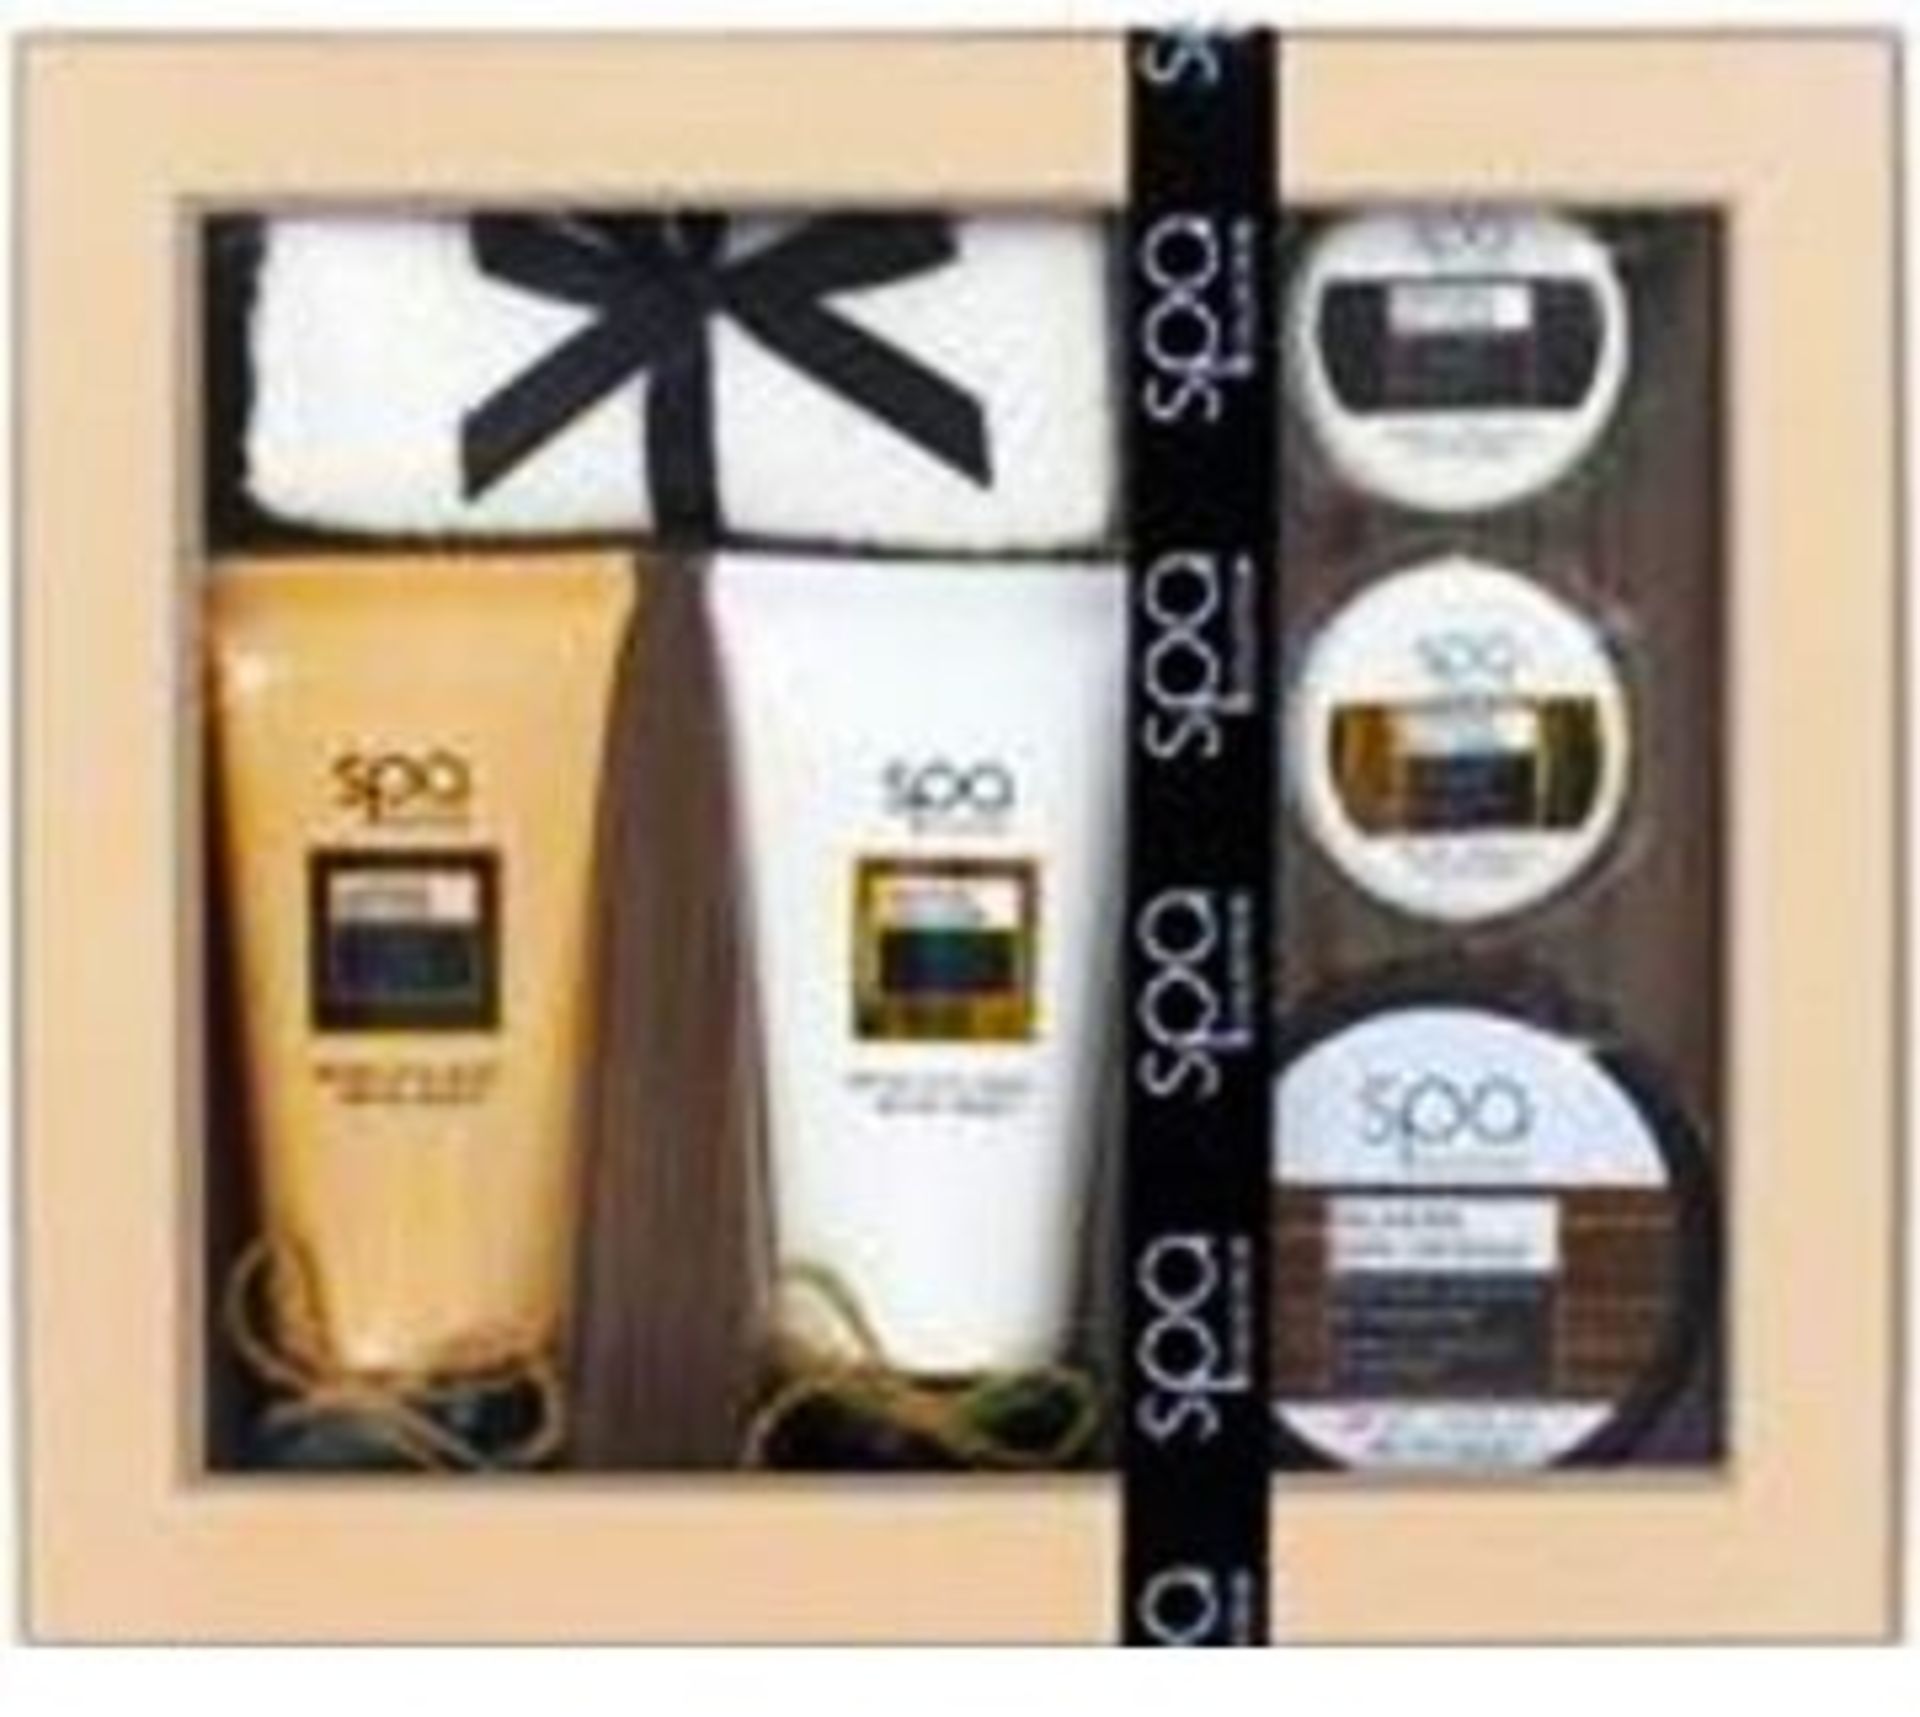 V Brand New Style and Grace Spa Collection 6 Piece Bath and Body Pamper Kit Gift Set